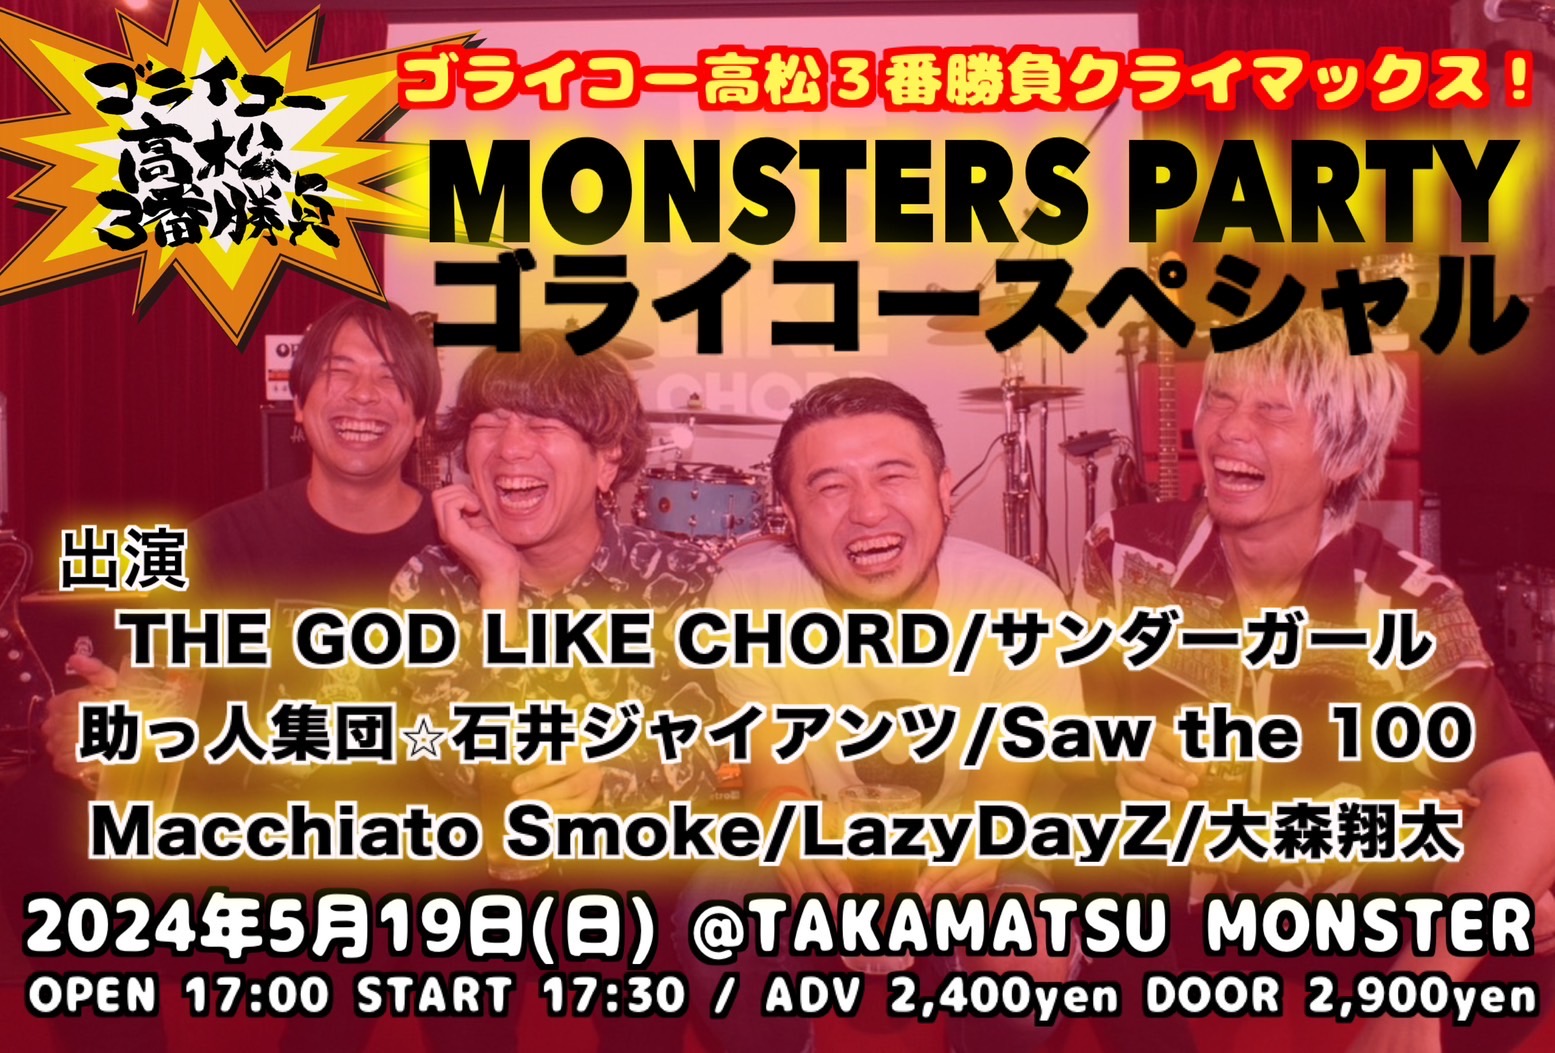 MONSTERS PARTY ゴライコーSP